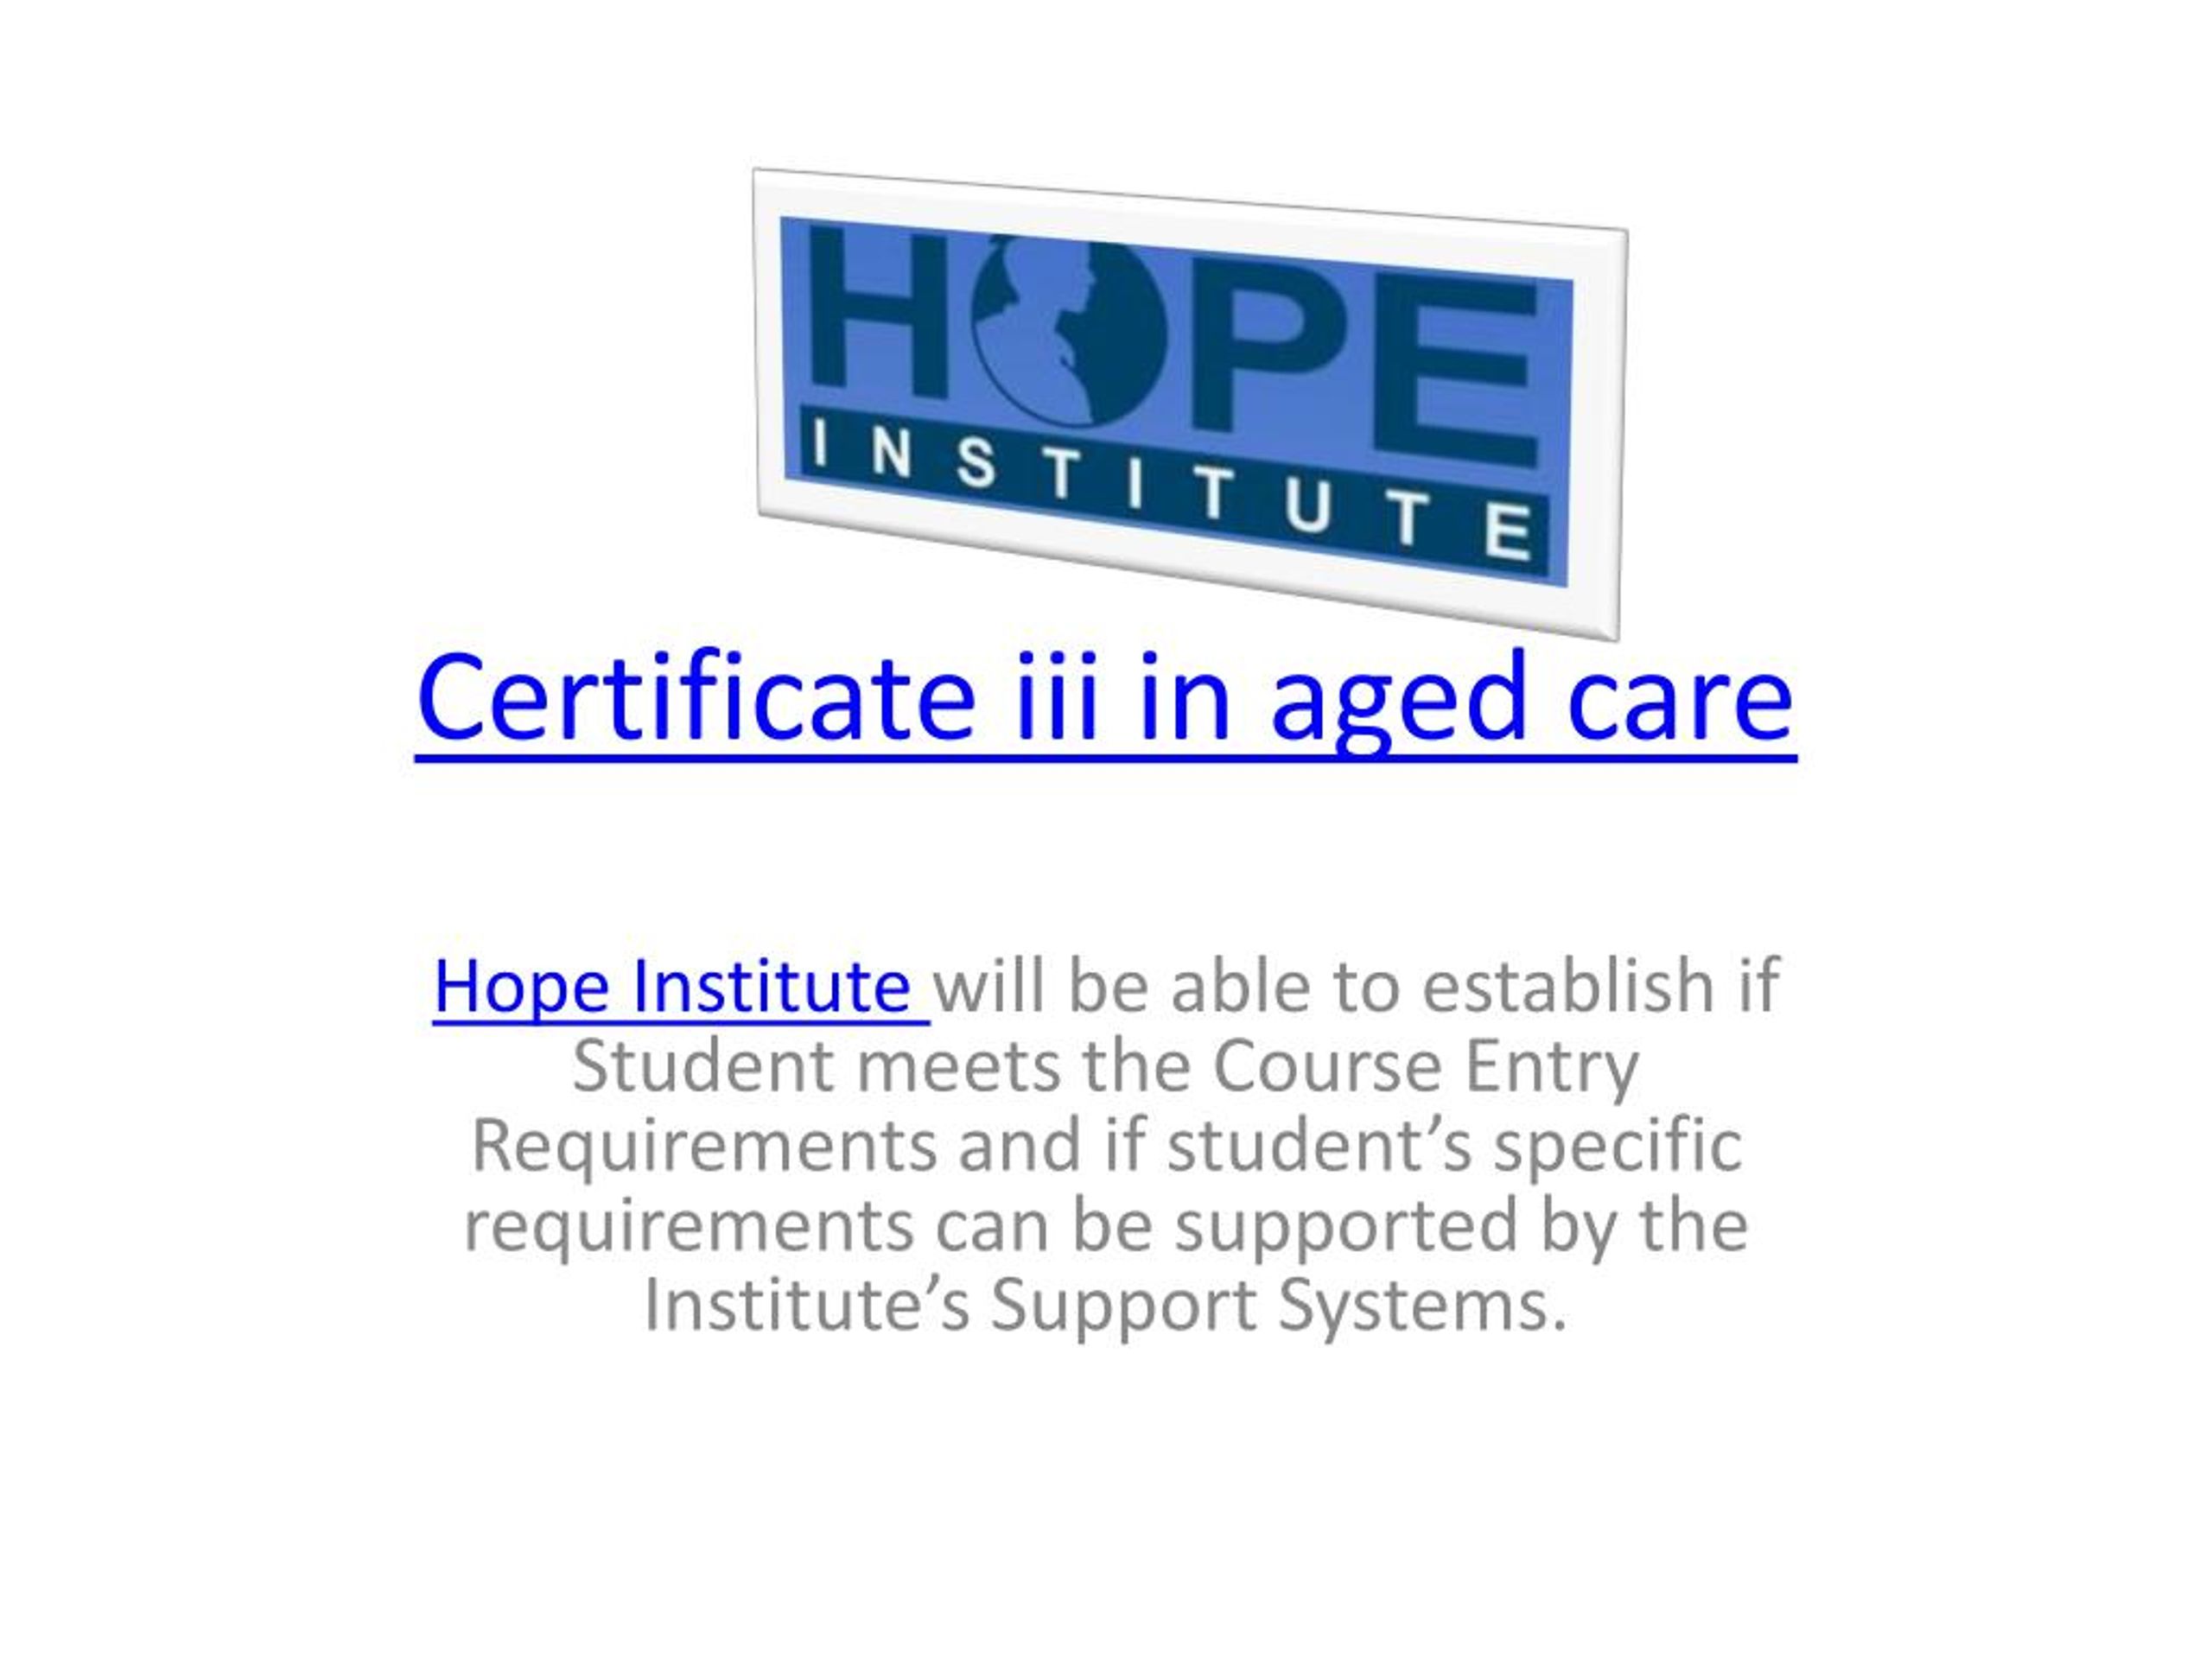 PPT Certificate iii aged care PowerPoint Presentation free download